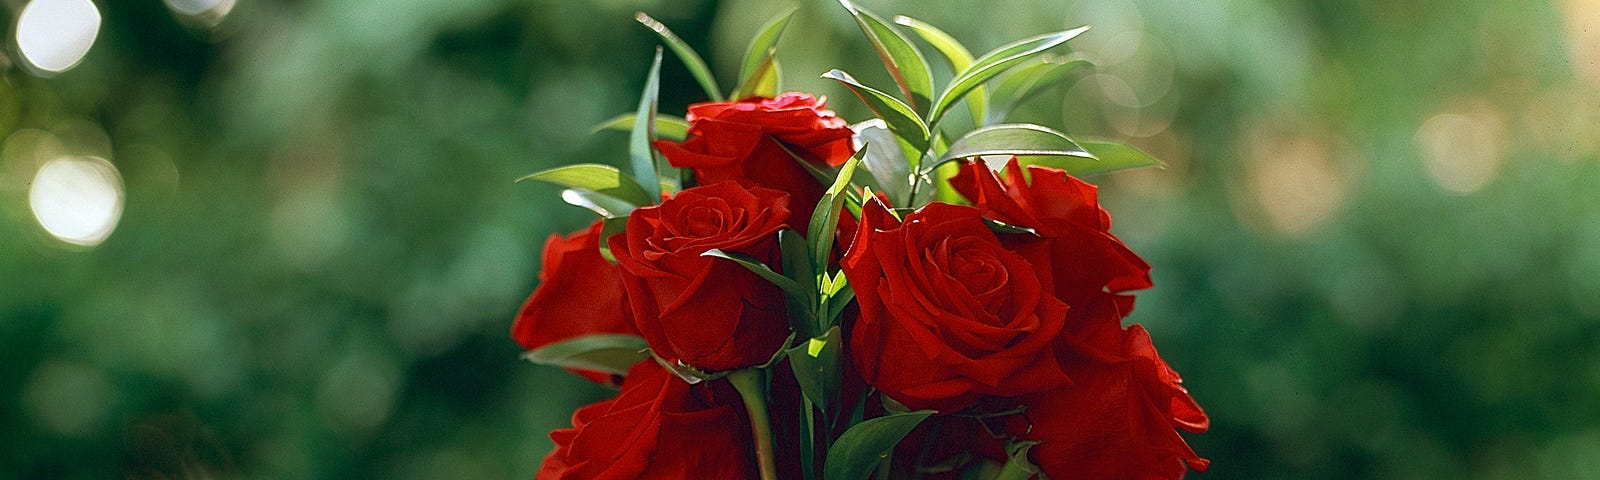 Unsplash photograph. Foreground: a bouquet of red roses in a jar, with a horseshoe resting against the jar. Background: lush green foliage, out of focus.